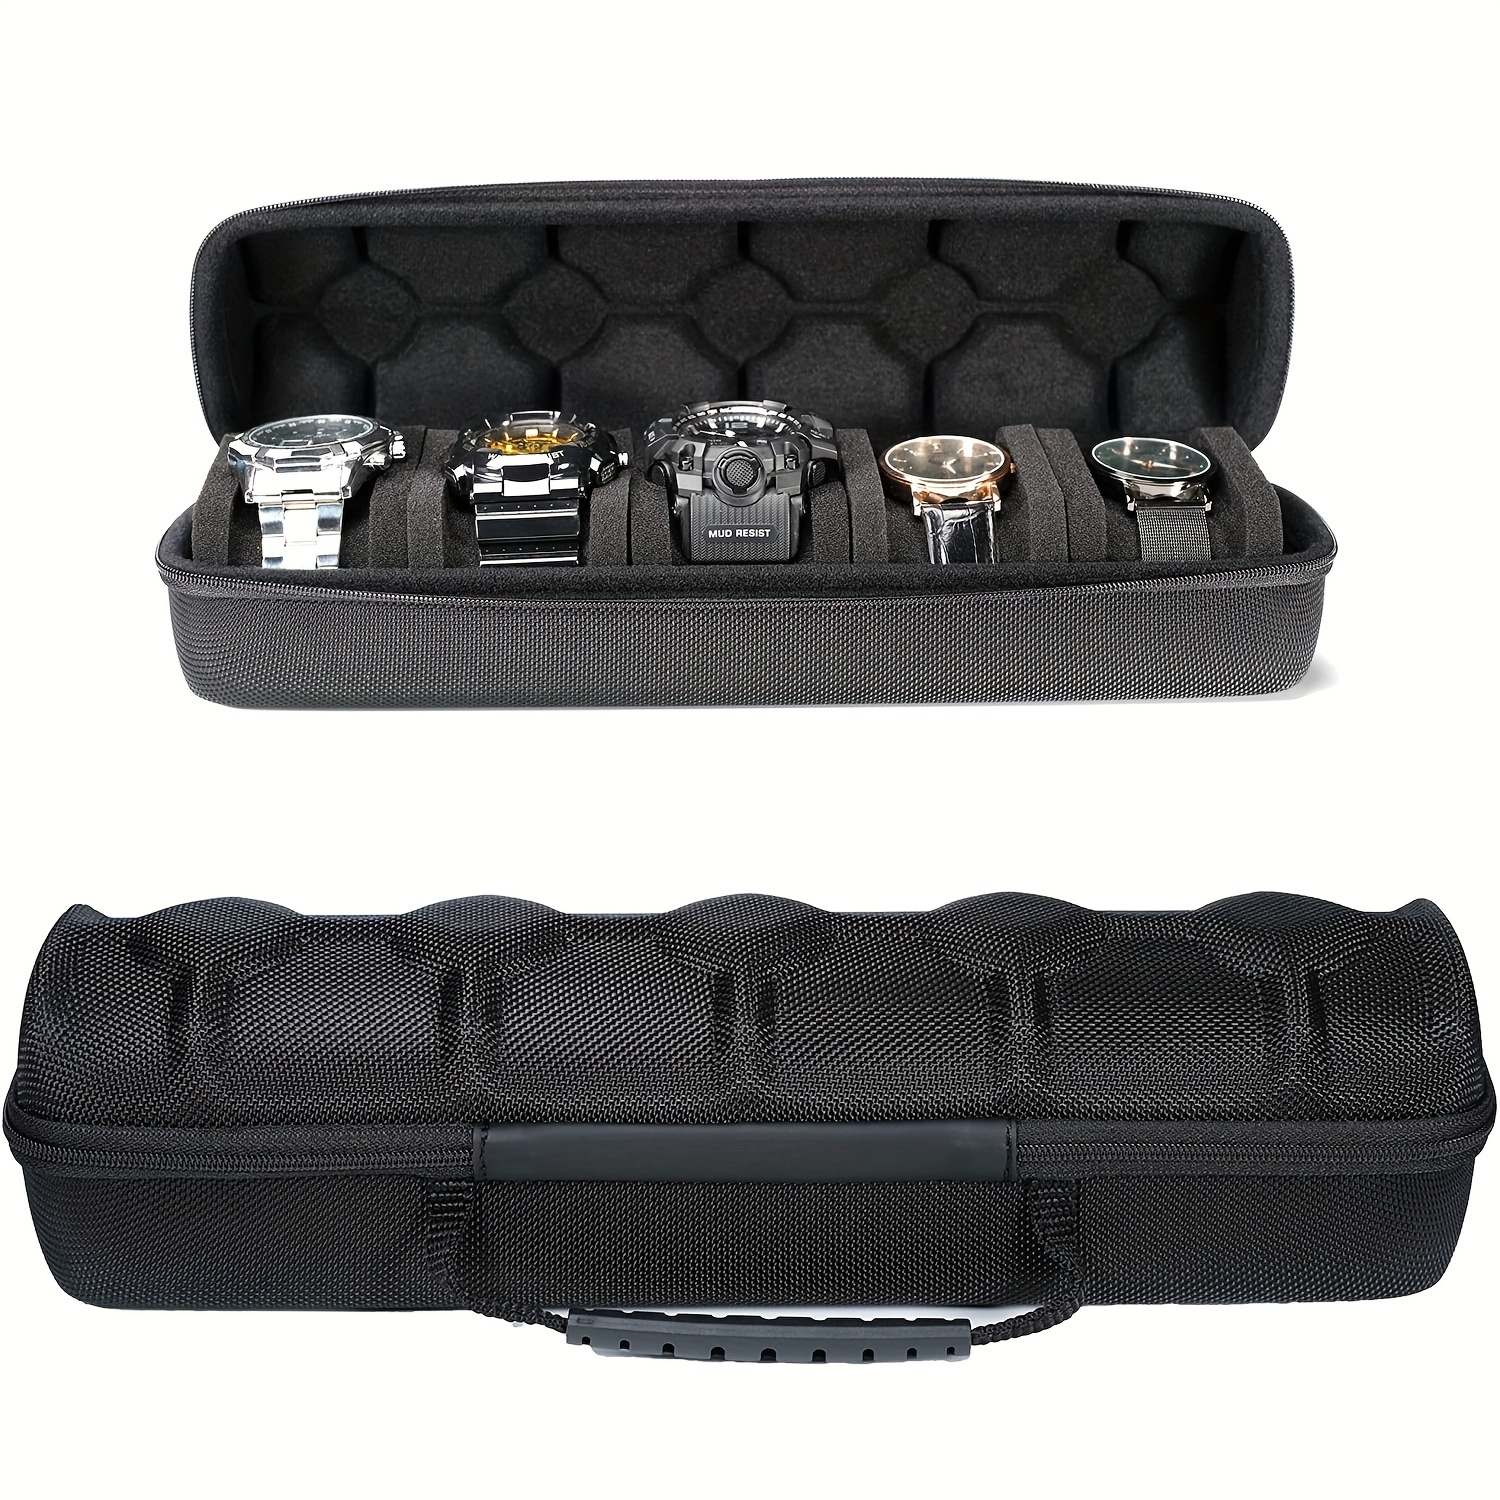 5 Slots Hard Watch Travel Case Storage With Anti-move Watch Pillow